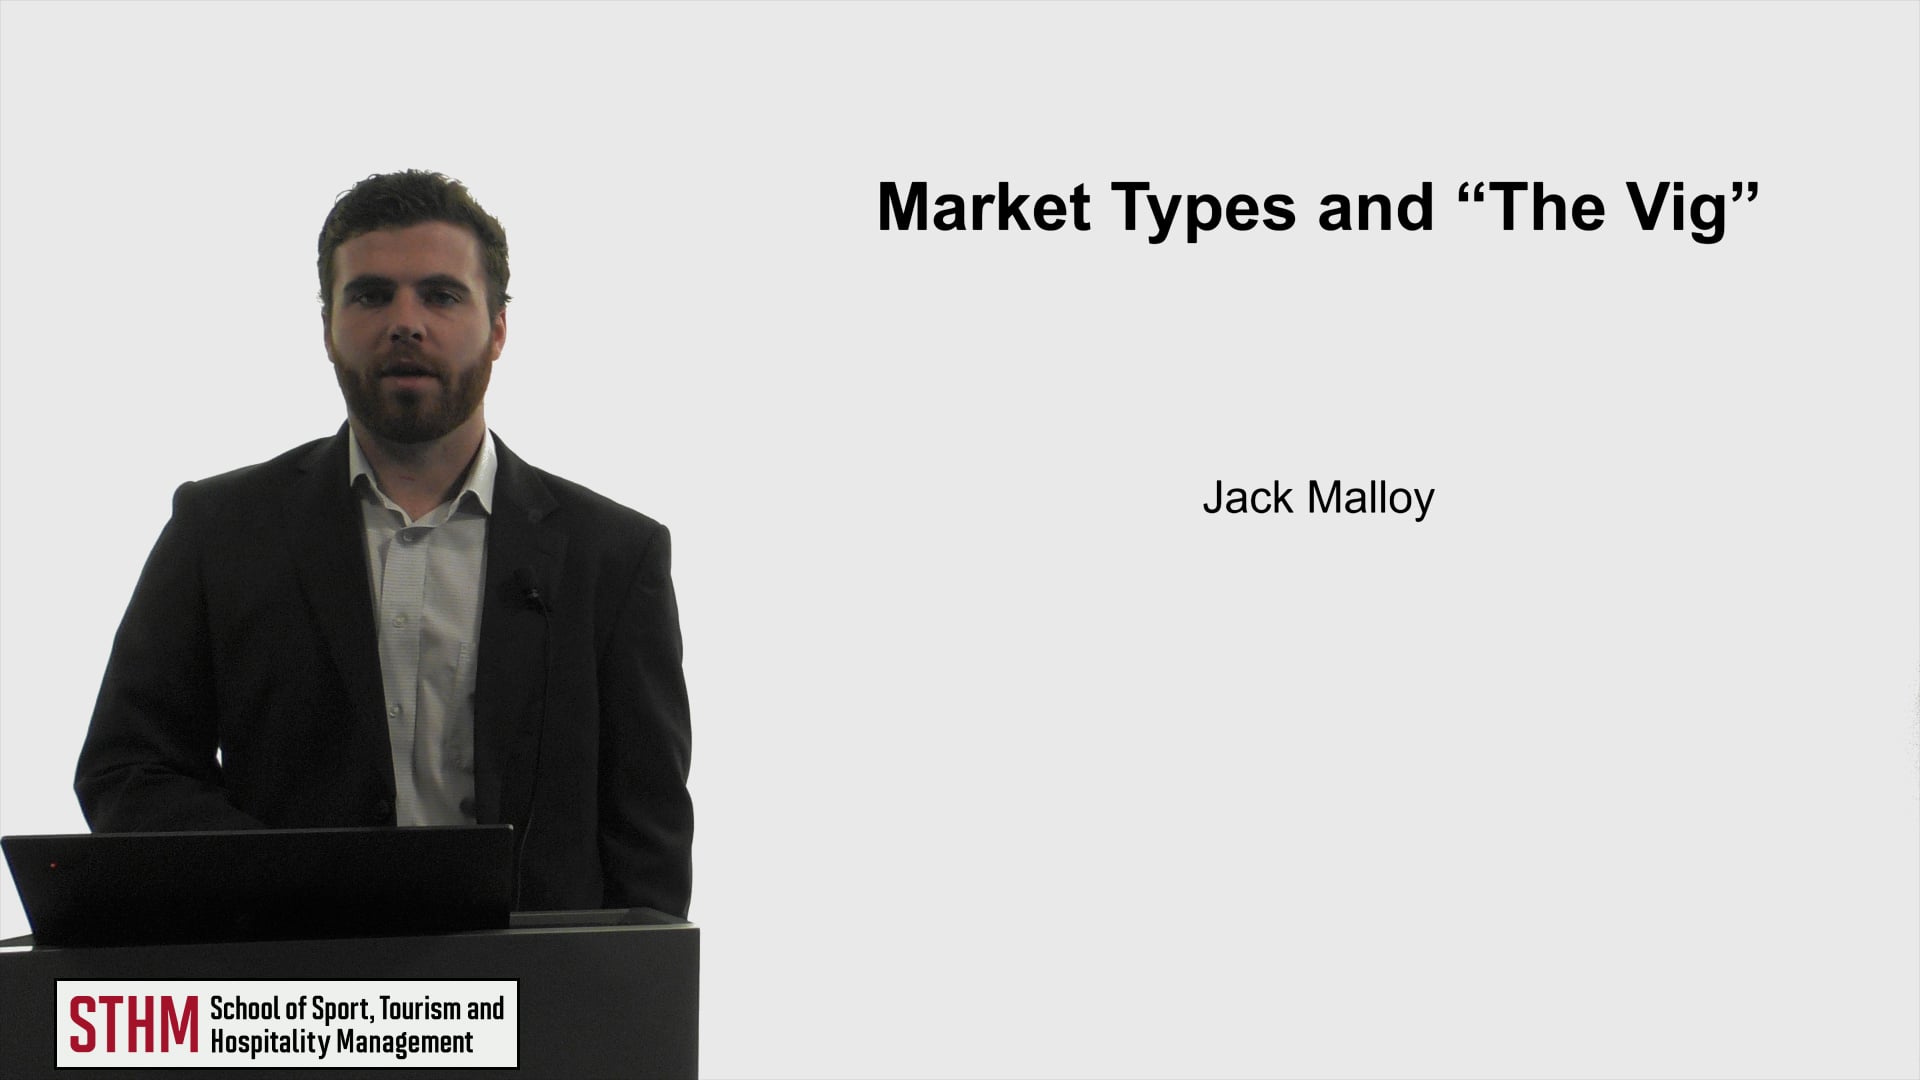 Market Types and “The Vig”